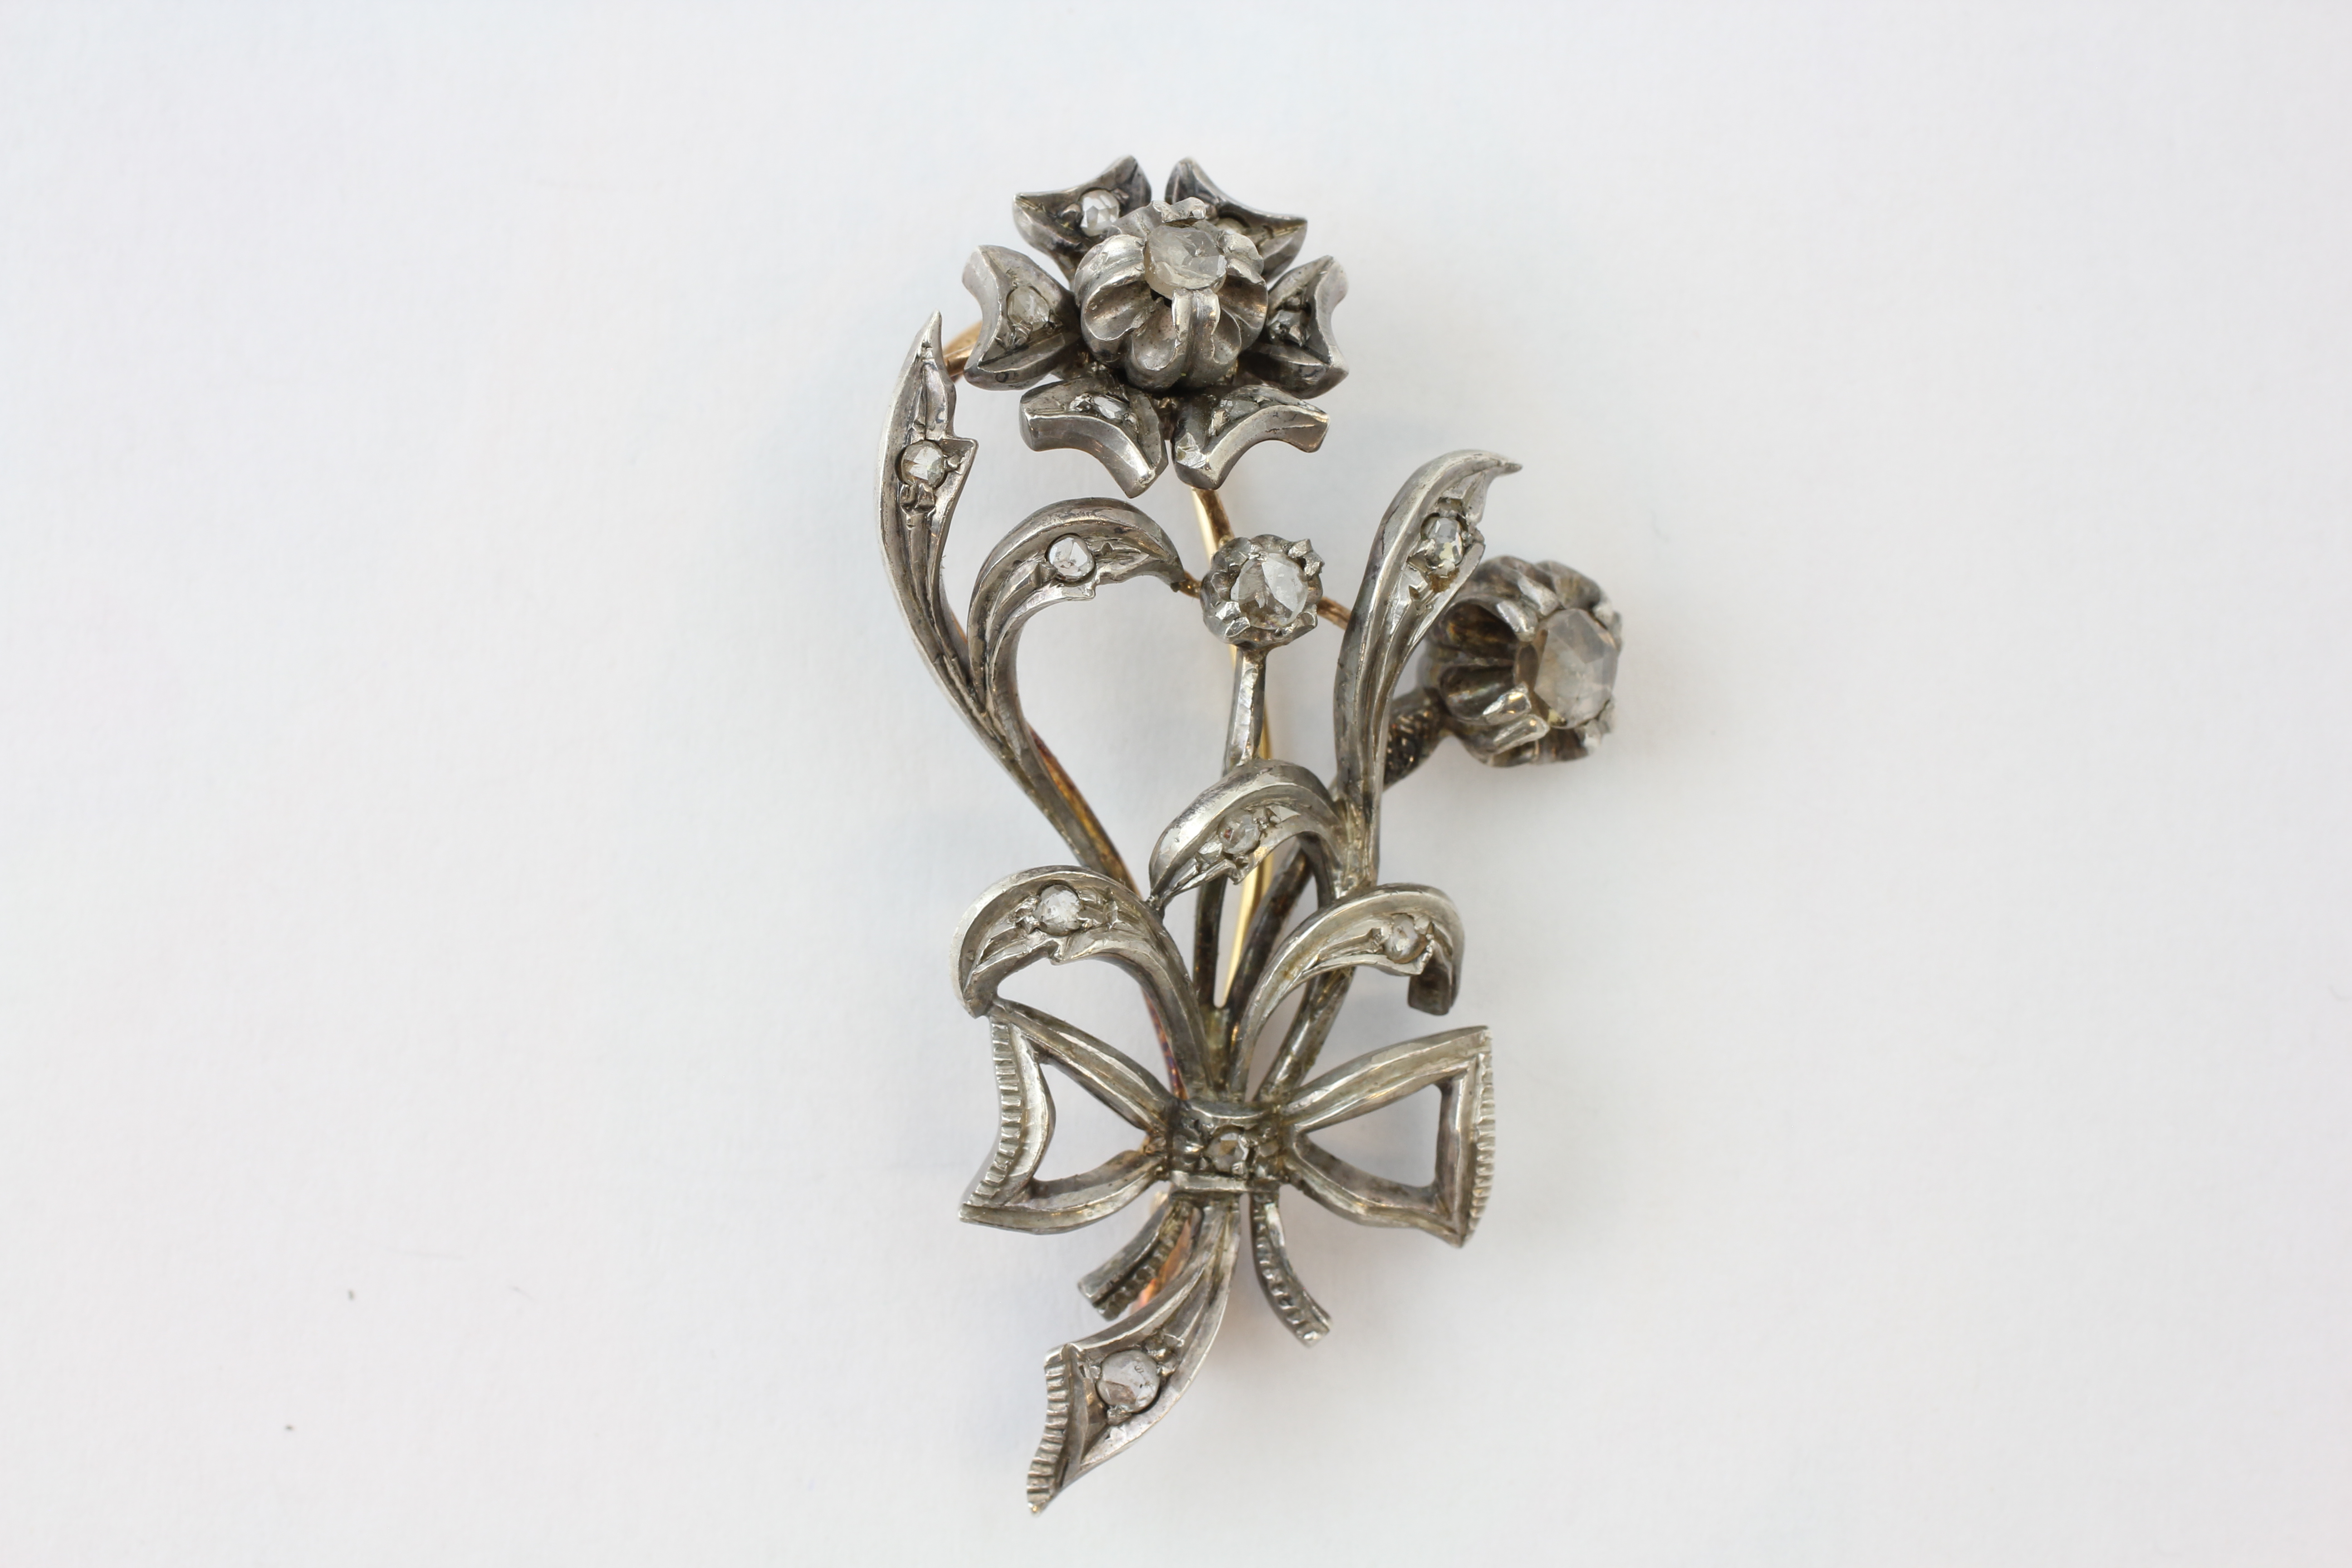 AN EDWARDIAN DIAMOND BROOCH OF FLOWERHEAD AND BOW DESIGN SET IN WHITE AND YELLOW PRECIOUS METAL, - Image 2 of 5